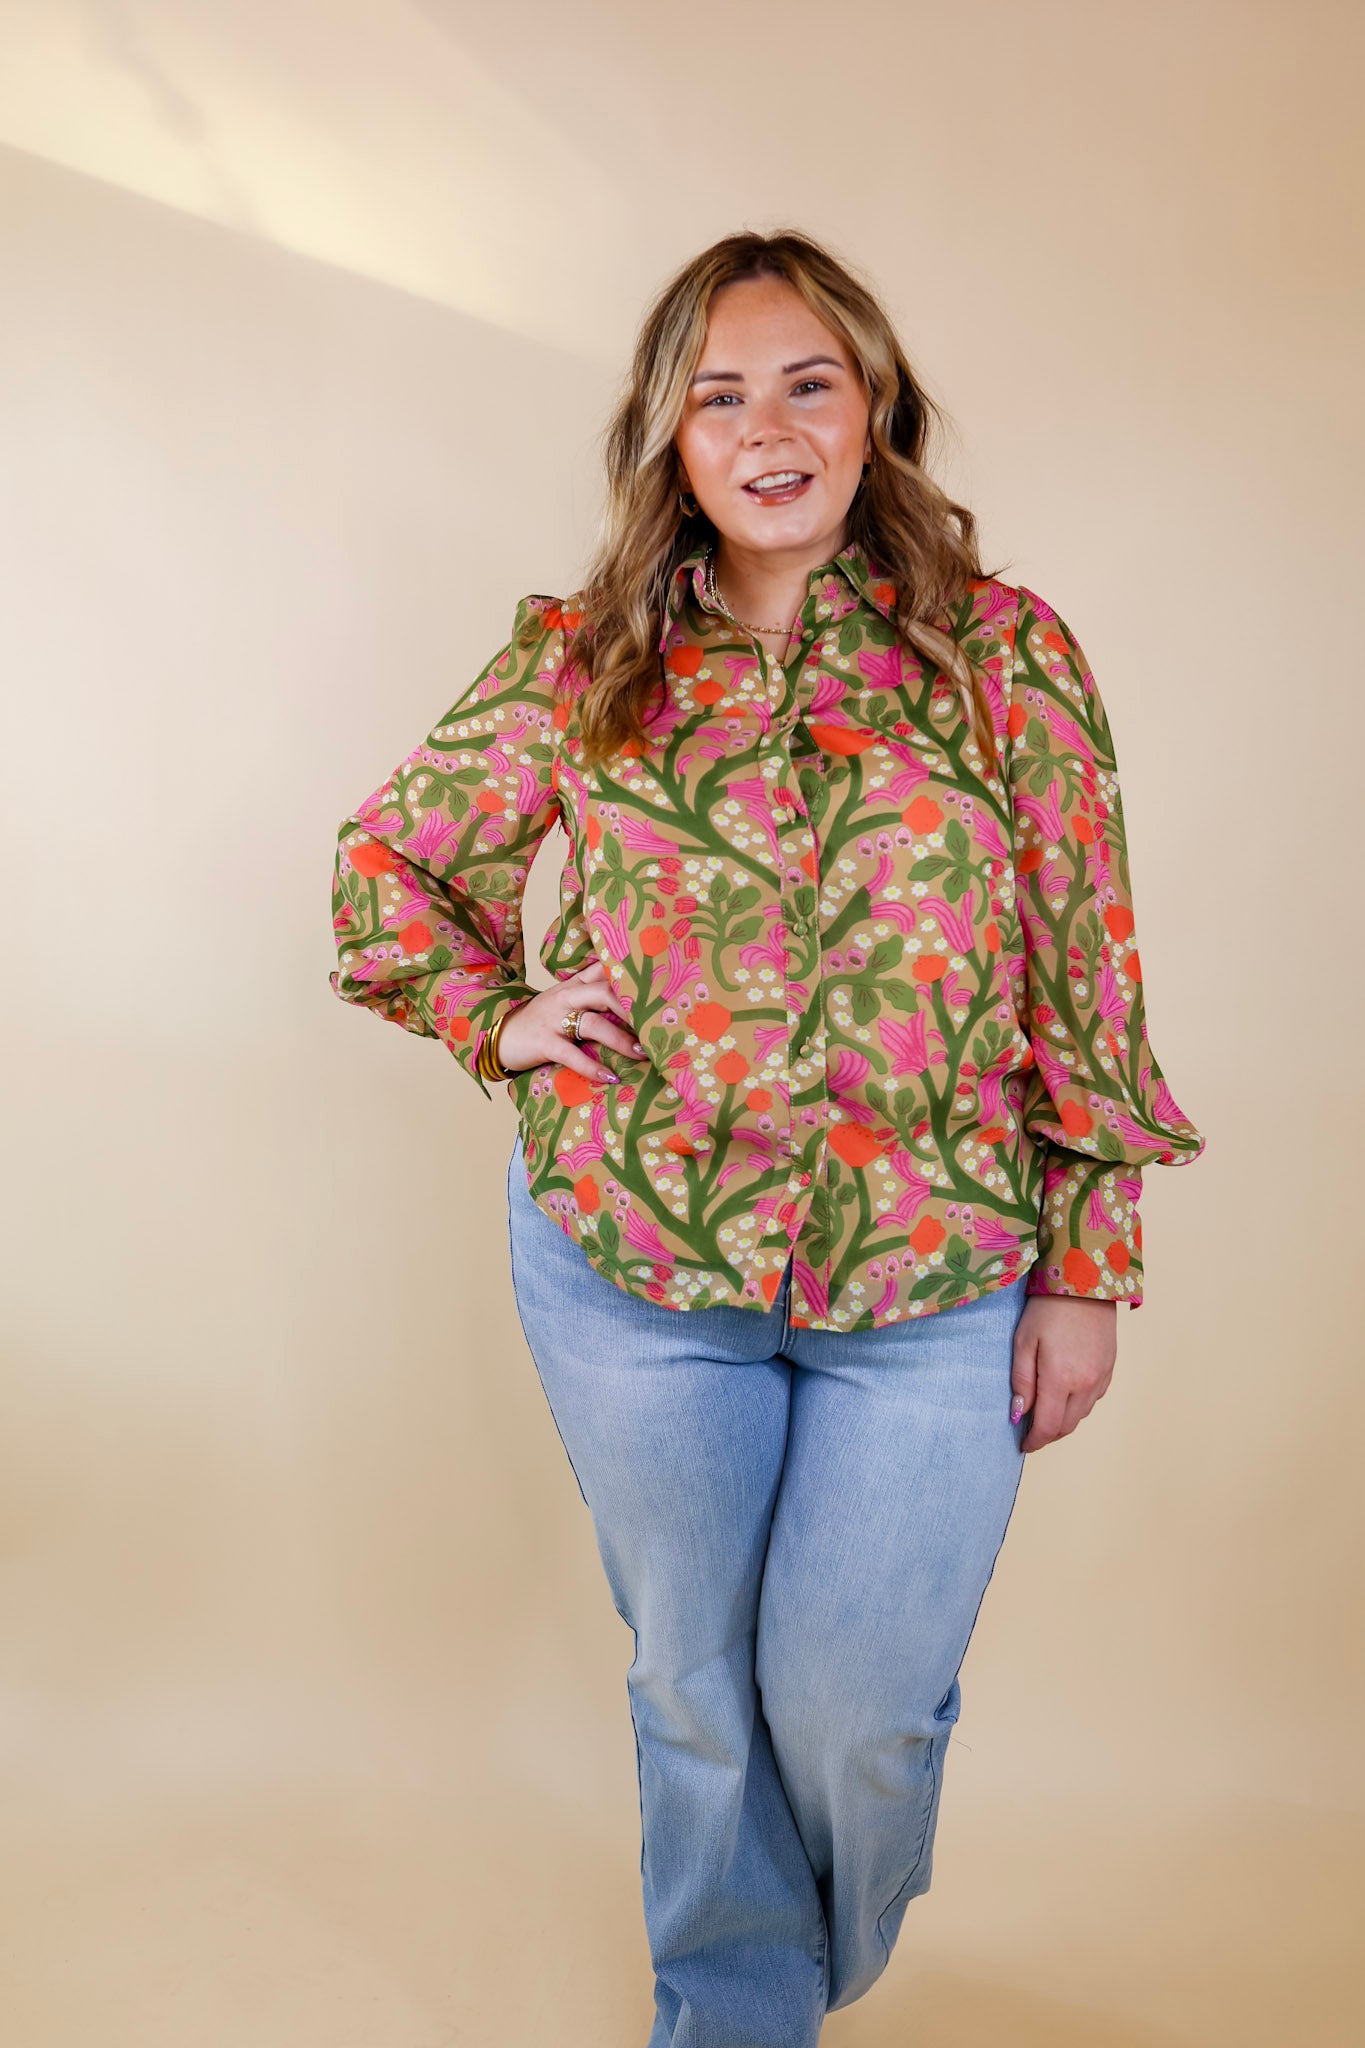 Upbeat Feels Floral Button Up Top with Long Sleeves in Green Mix - Giddy Up Glamour Boutique